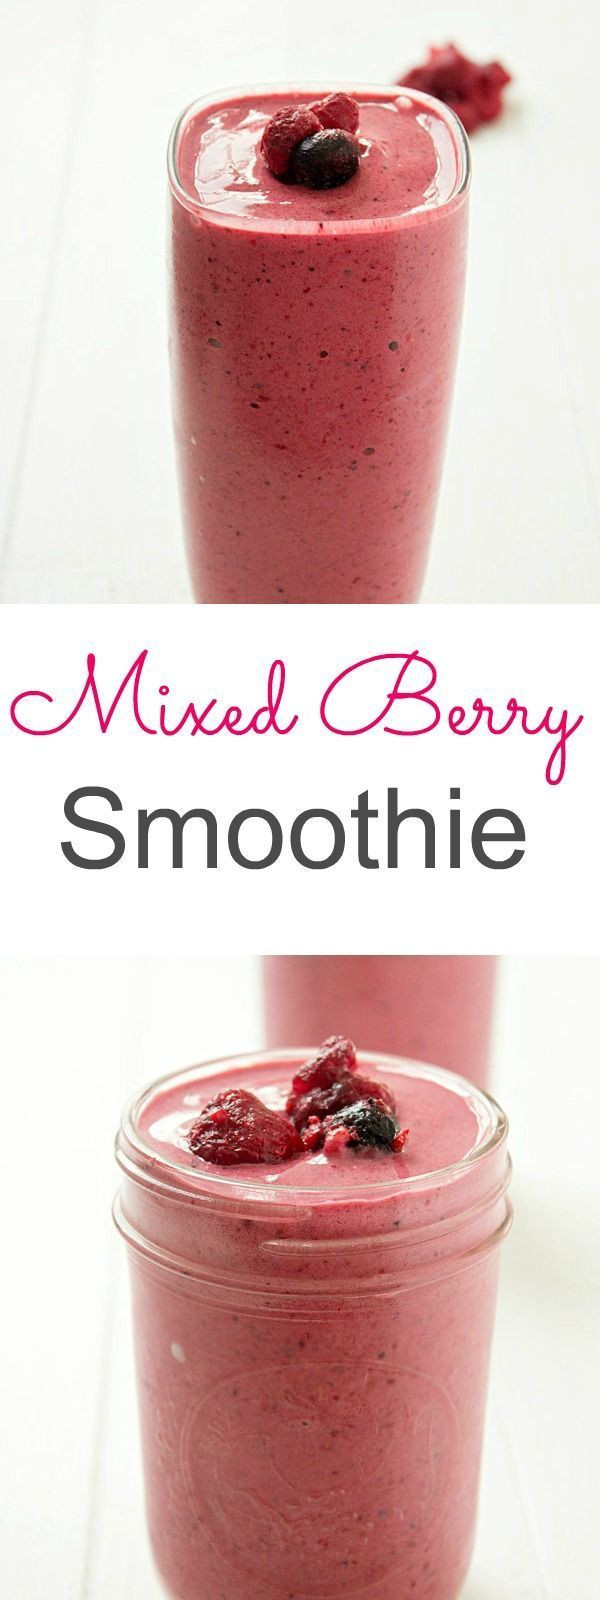 Easy Healthy Fruit Smoothies
 Best 25 Frozen berry smoothie ideas on Pinterest